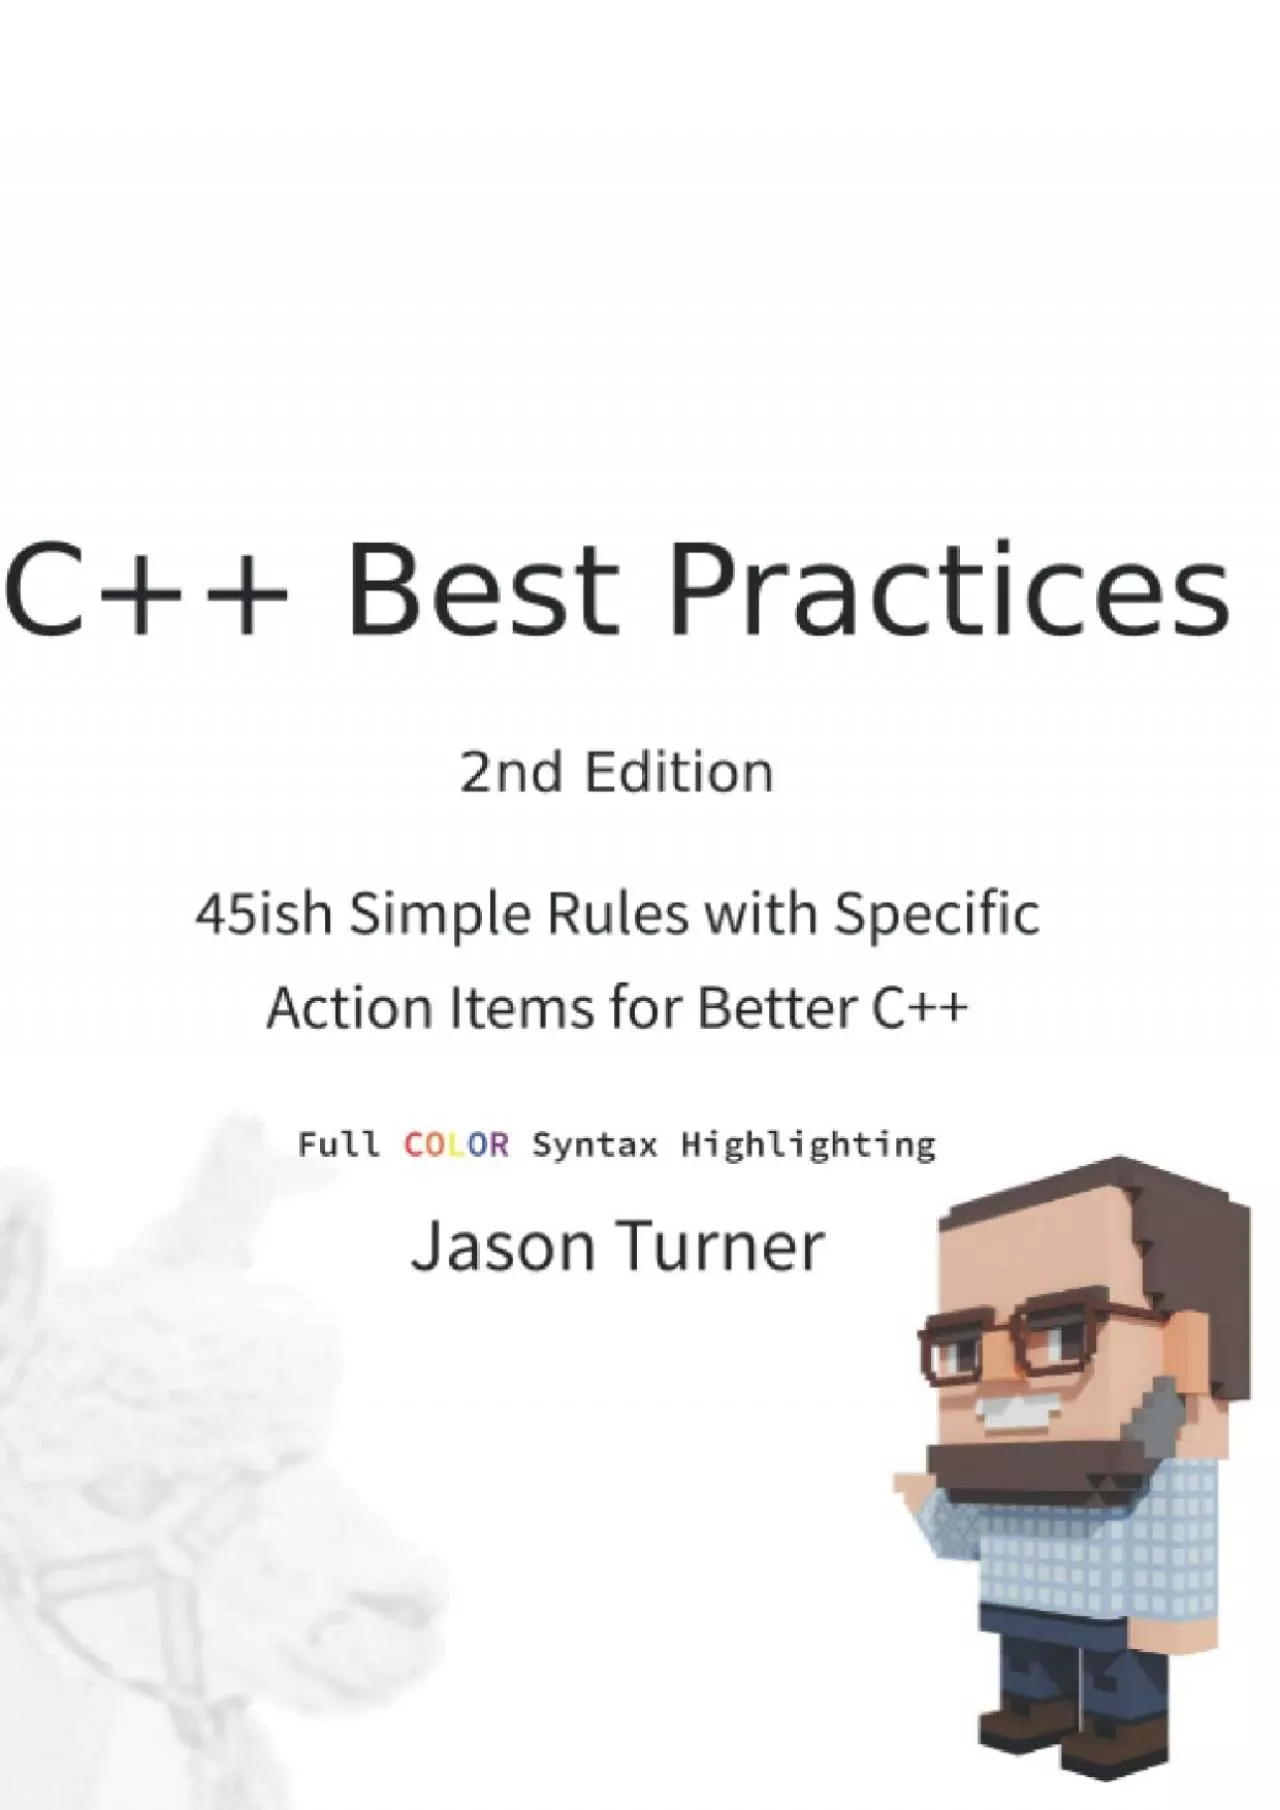 [DOWLOAD]-C++ Best Practices: 45ish Simple Rules with Specific Action Items for Better